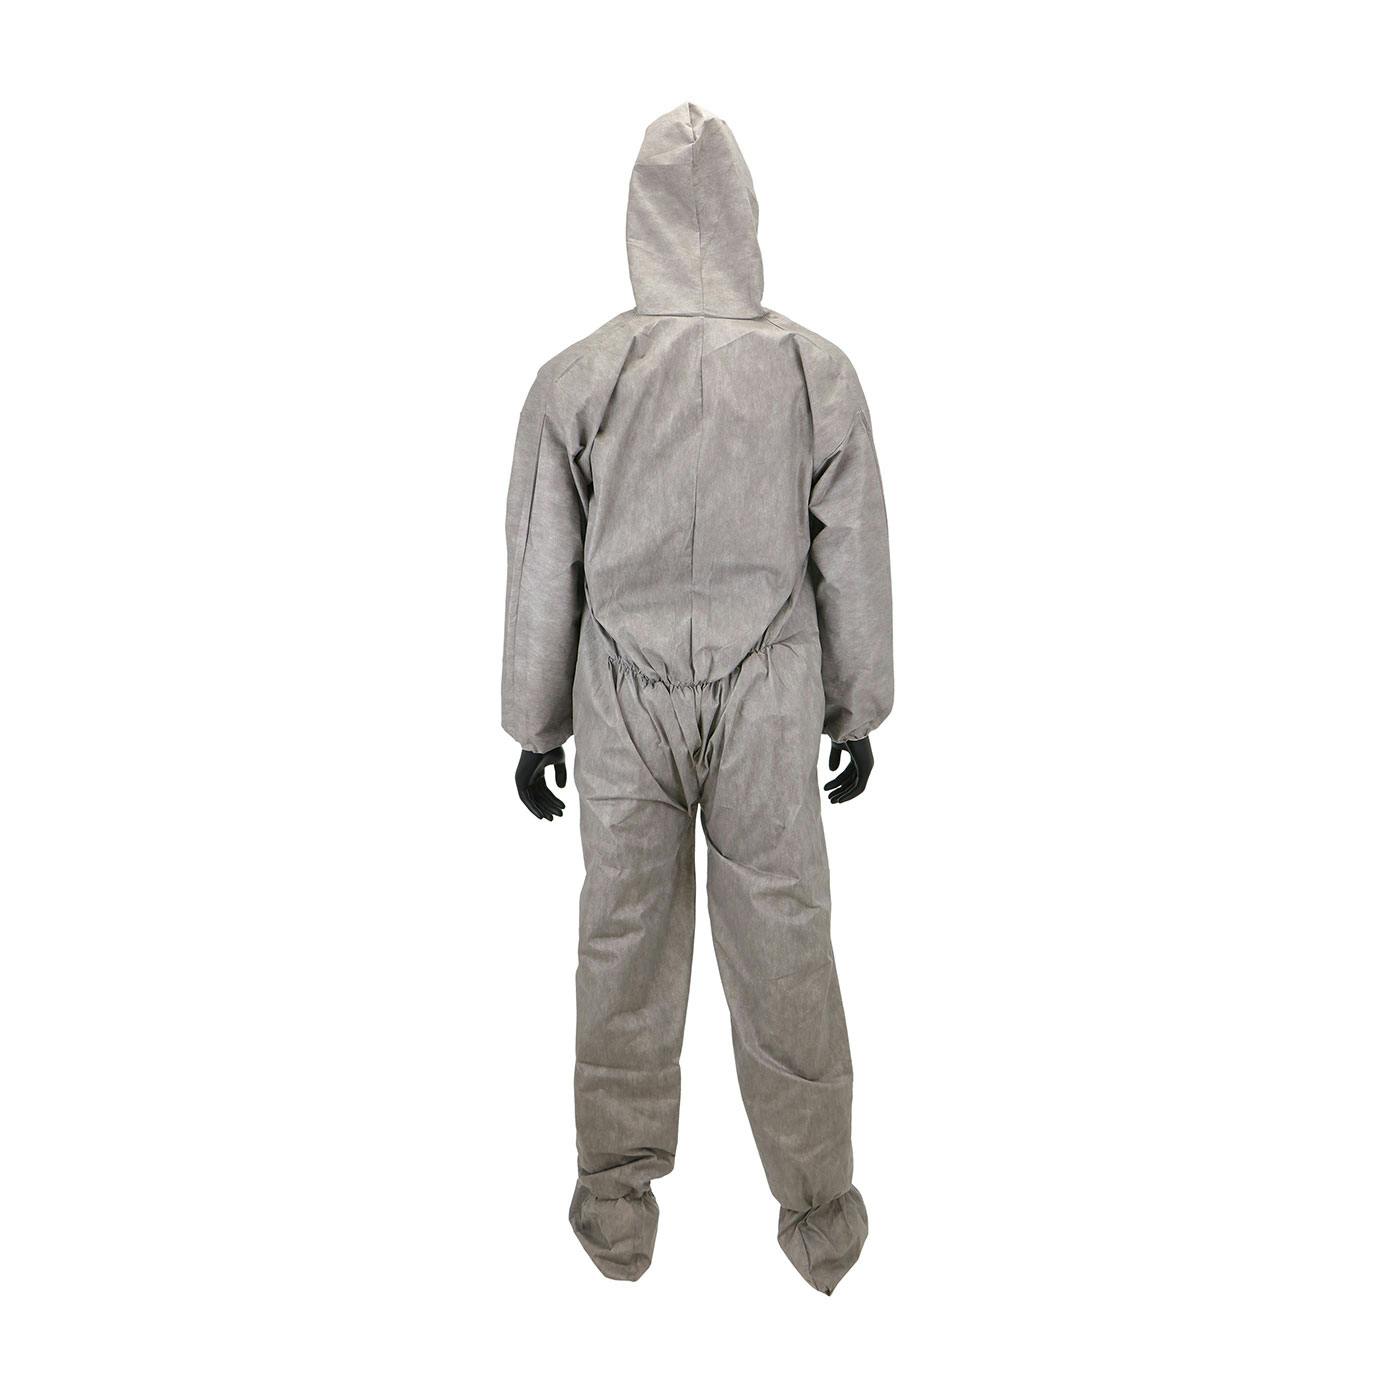 PosiWear M3 Coverall with Hood & Boot 50 gsm, Gray (C3909)